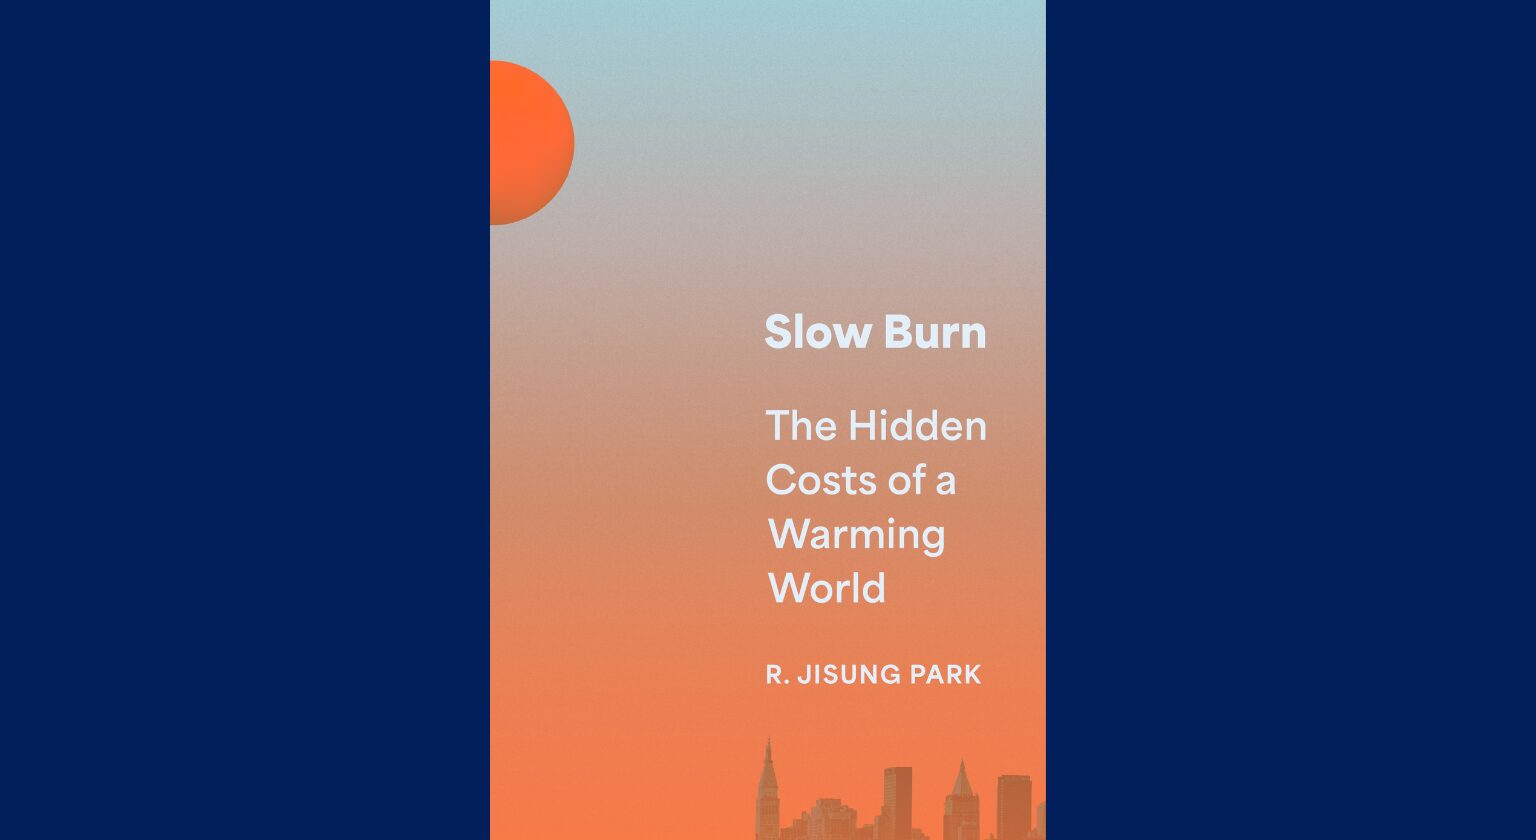 SP2’s R. Jisung Park publishes “Slow Burn: The Hidden Costs of a Warming World” 